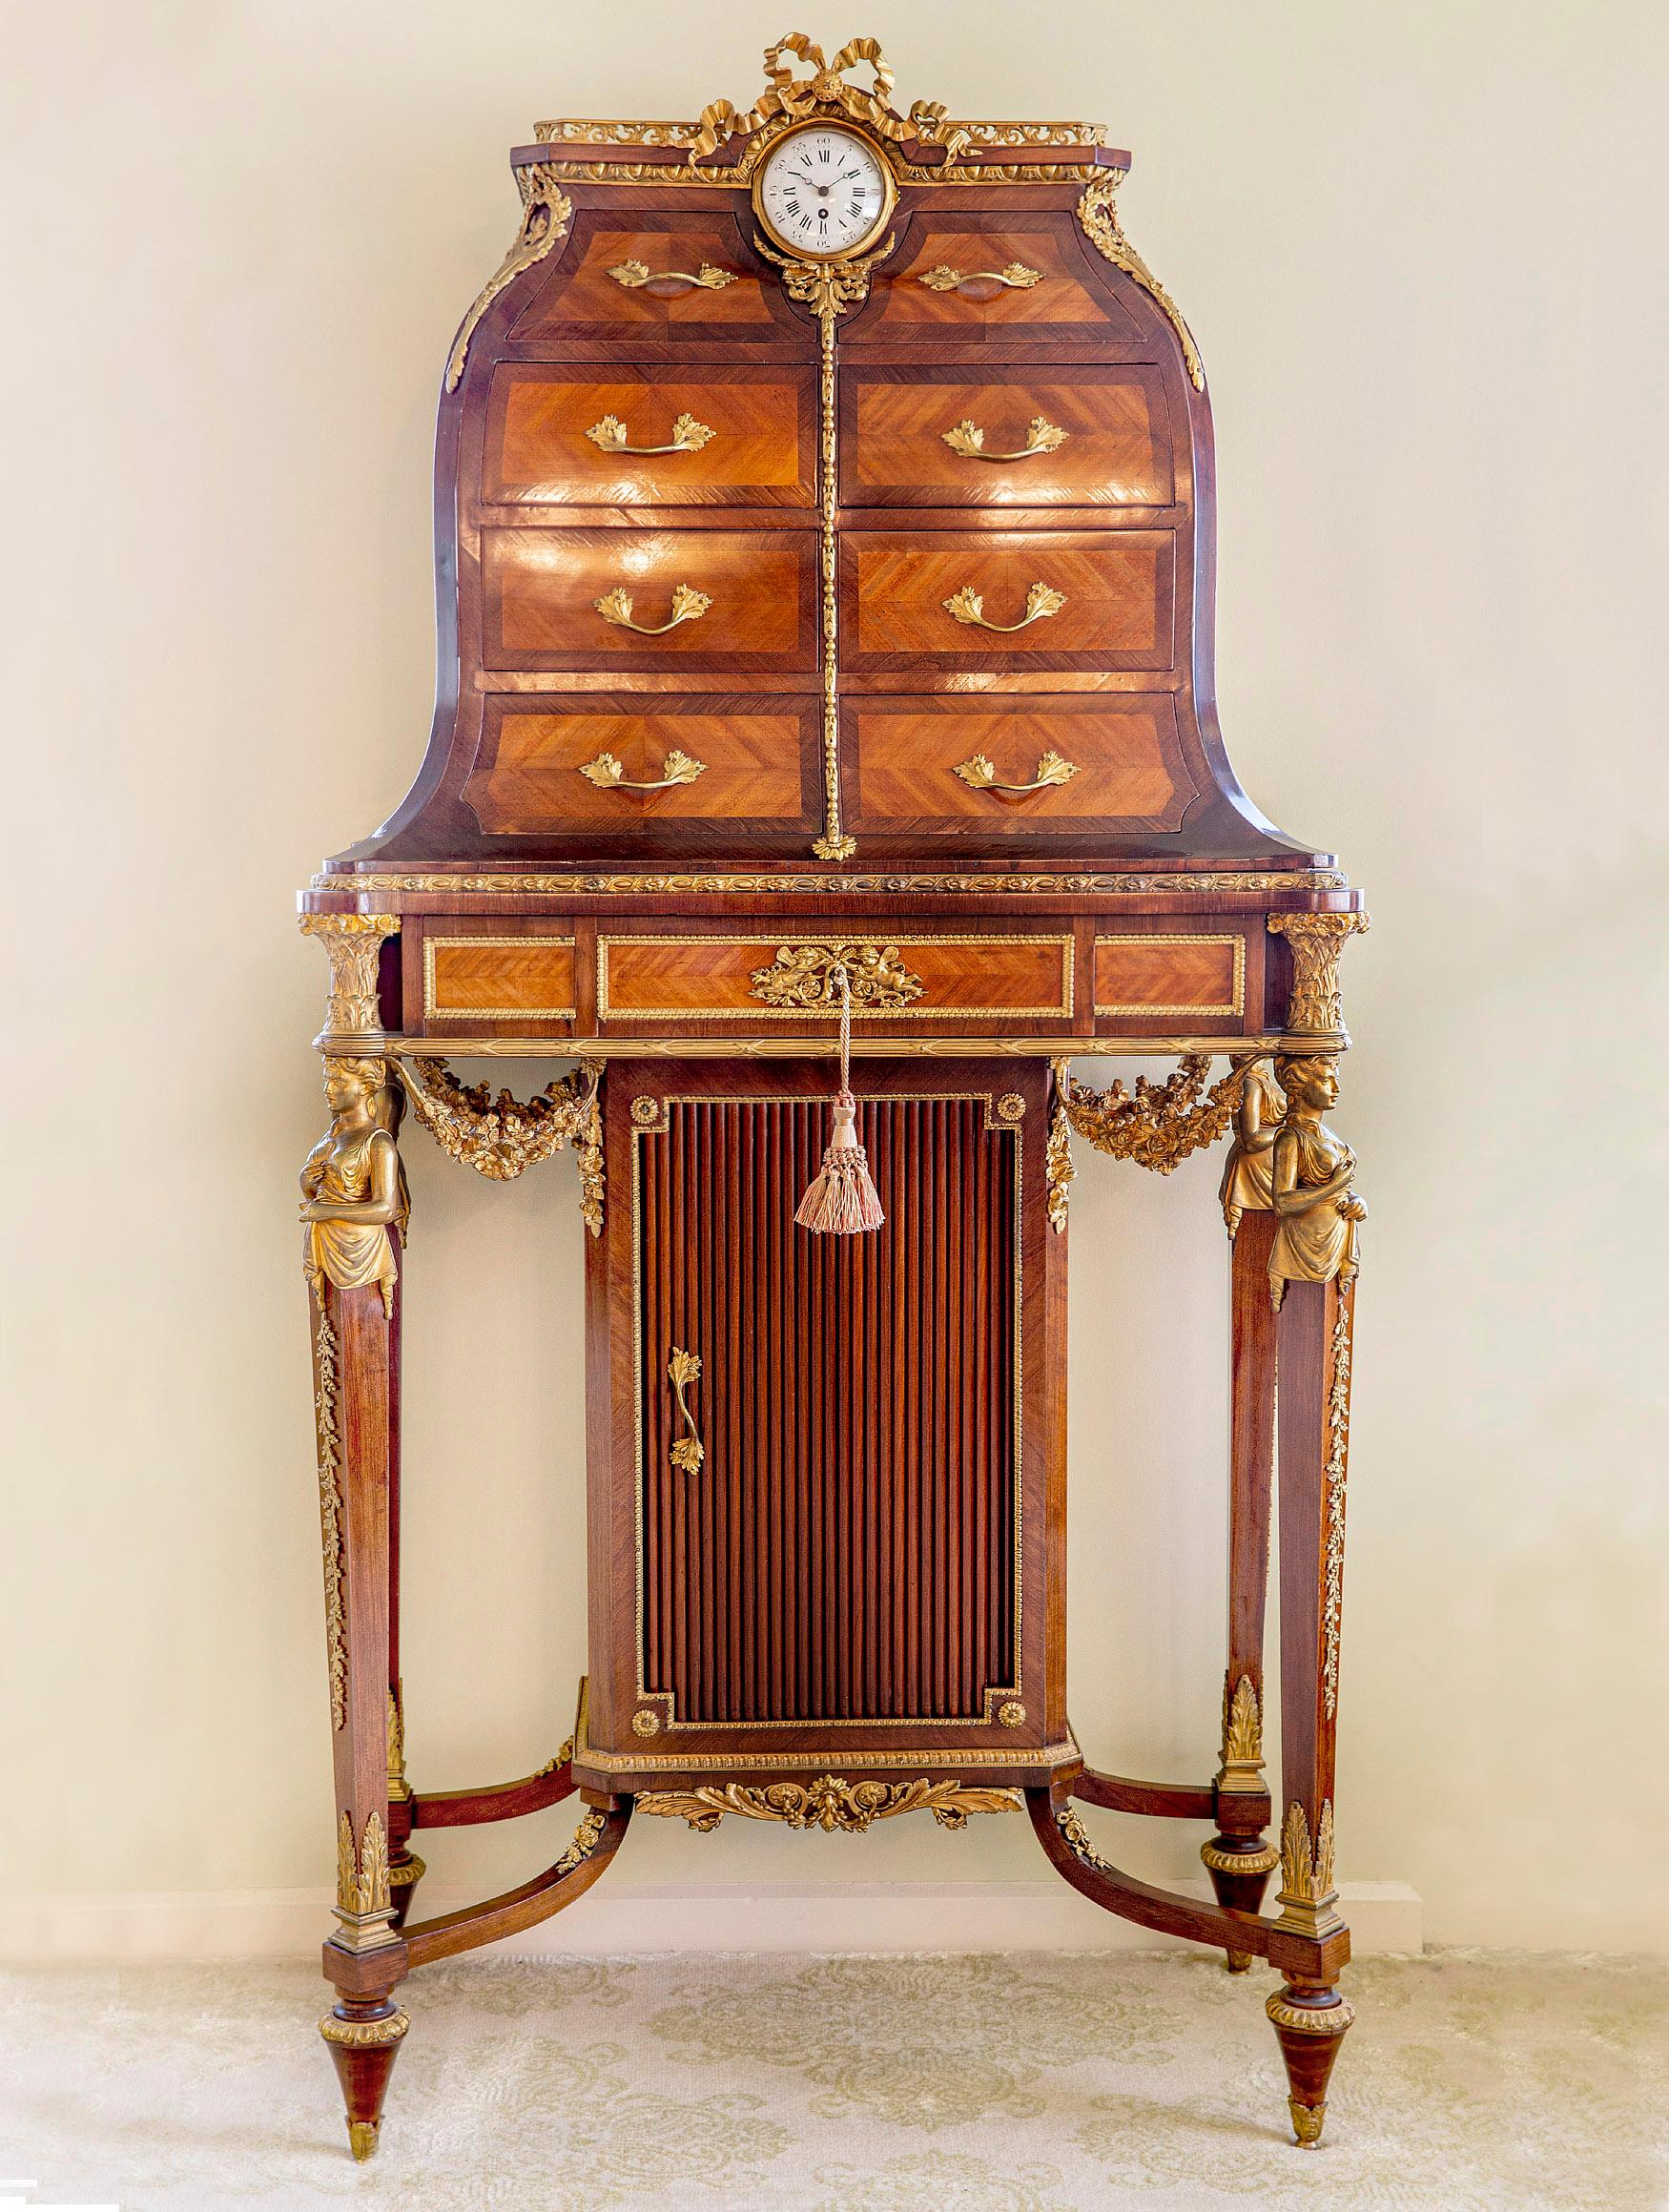 A Very Rare Late 19th Century Gilt Bronze Mounted Louis XVI Style Desk/Cabinet By François Linke

François Linke

The cartonnier top surmounted by a pierced guilloche acanthus gallery, centered with a clock and bronze bow, above eight drawers. the